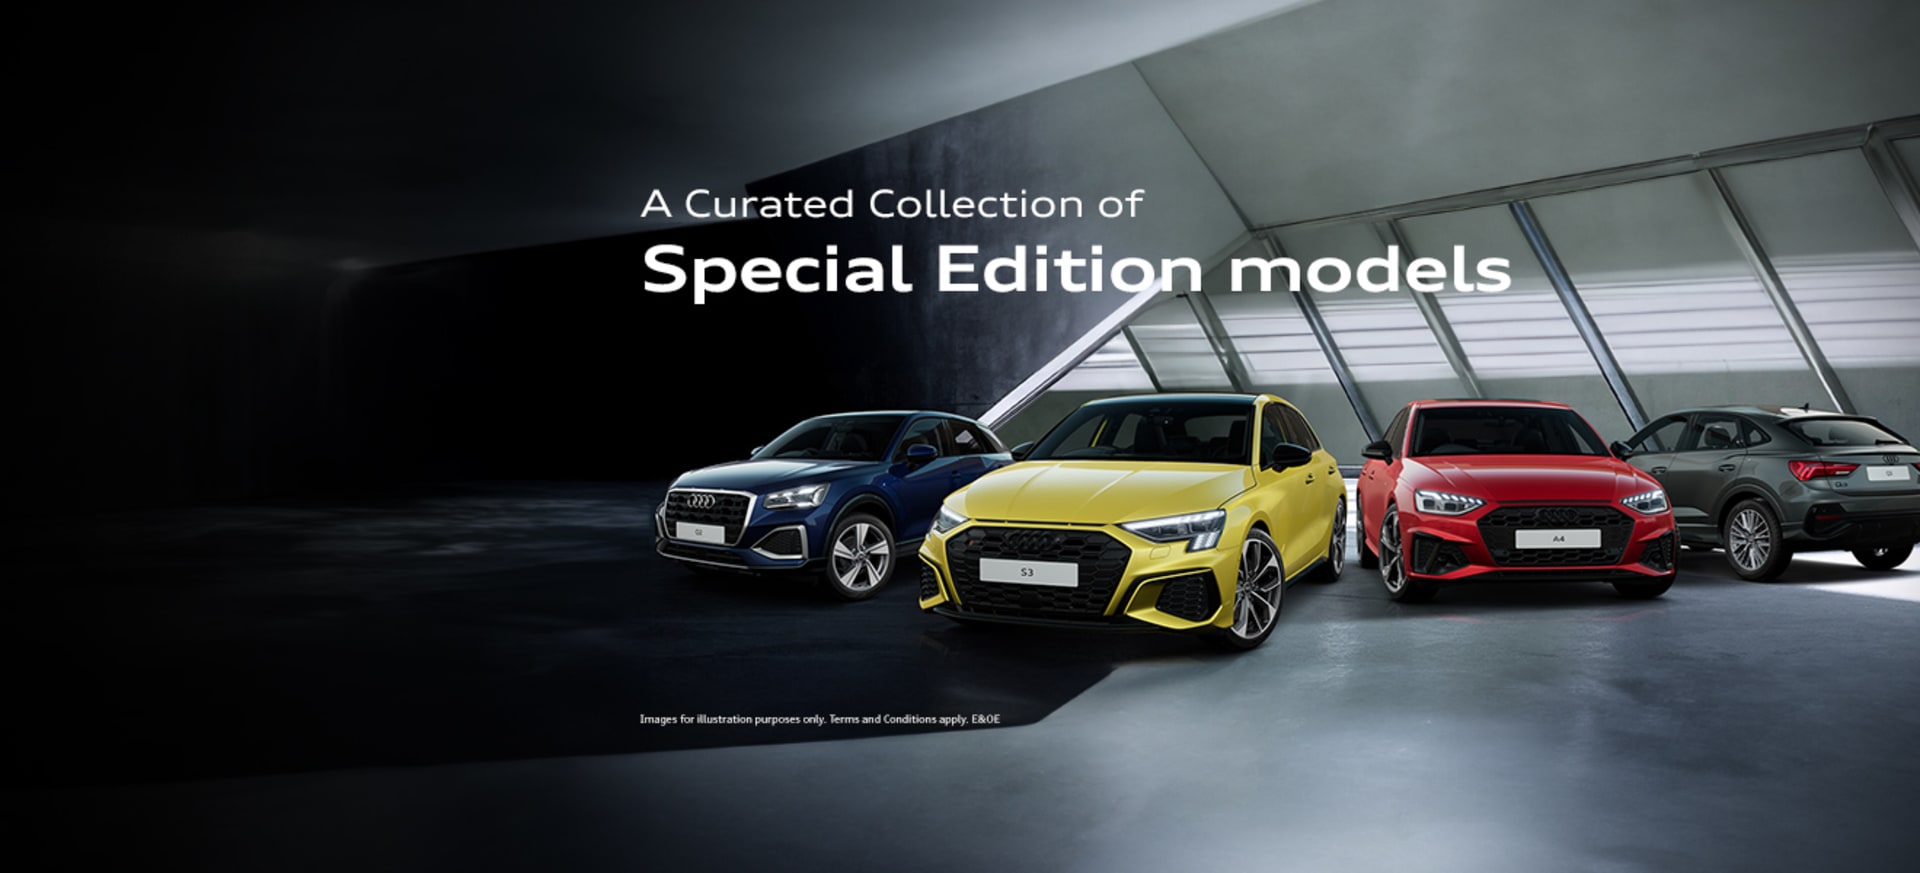 Audi a Curated Collection of Special Edition models